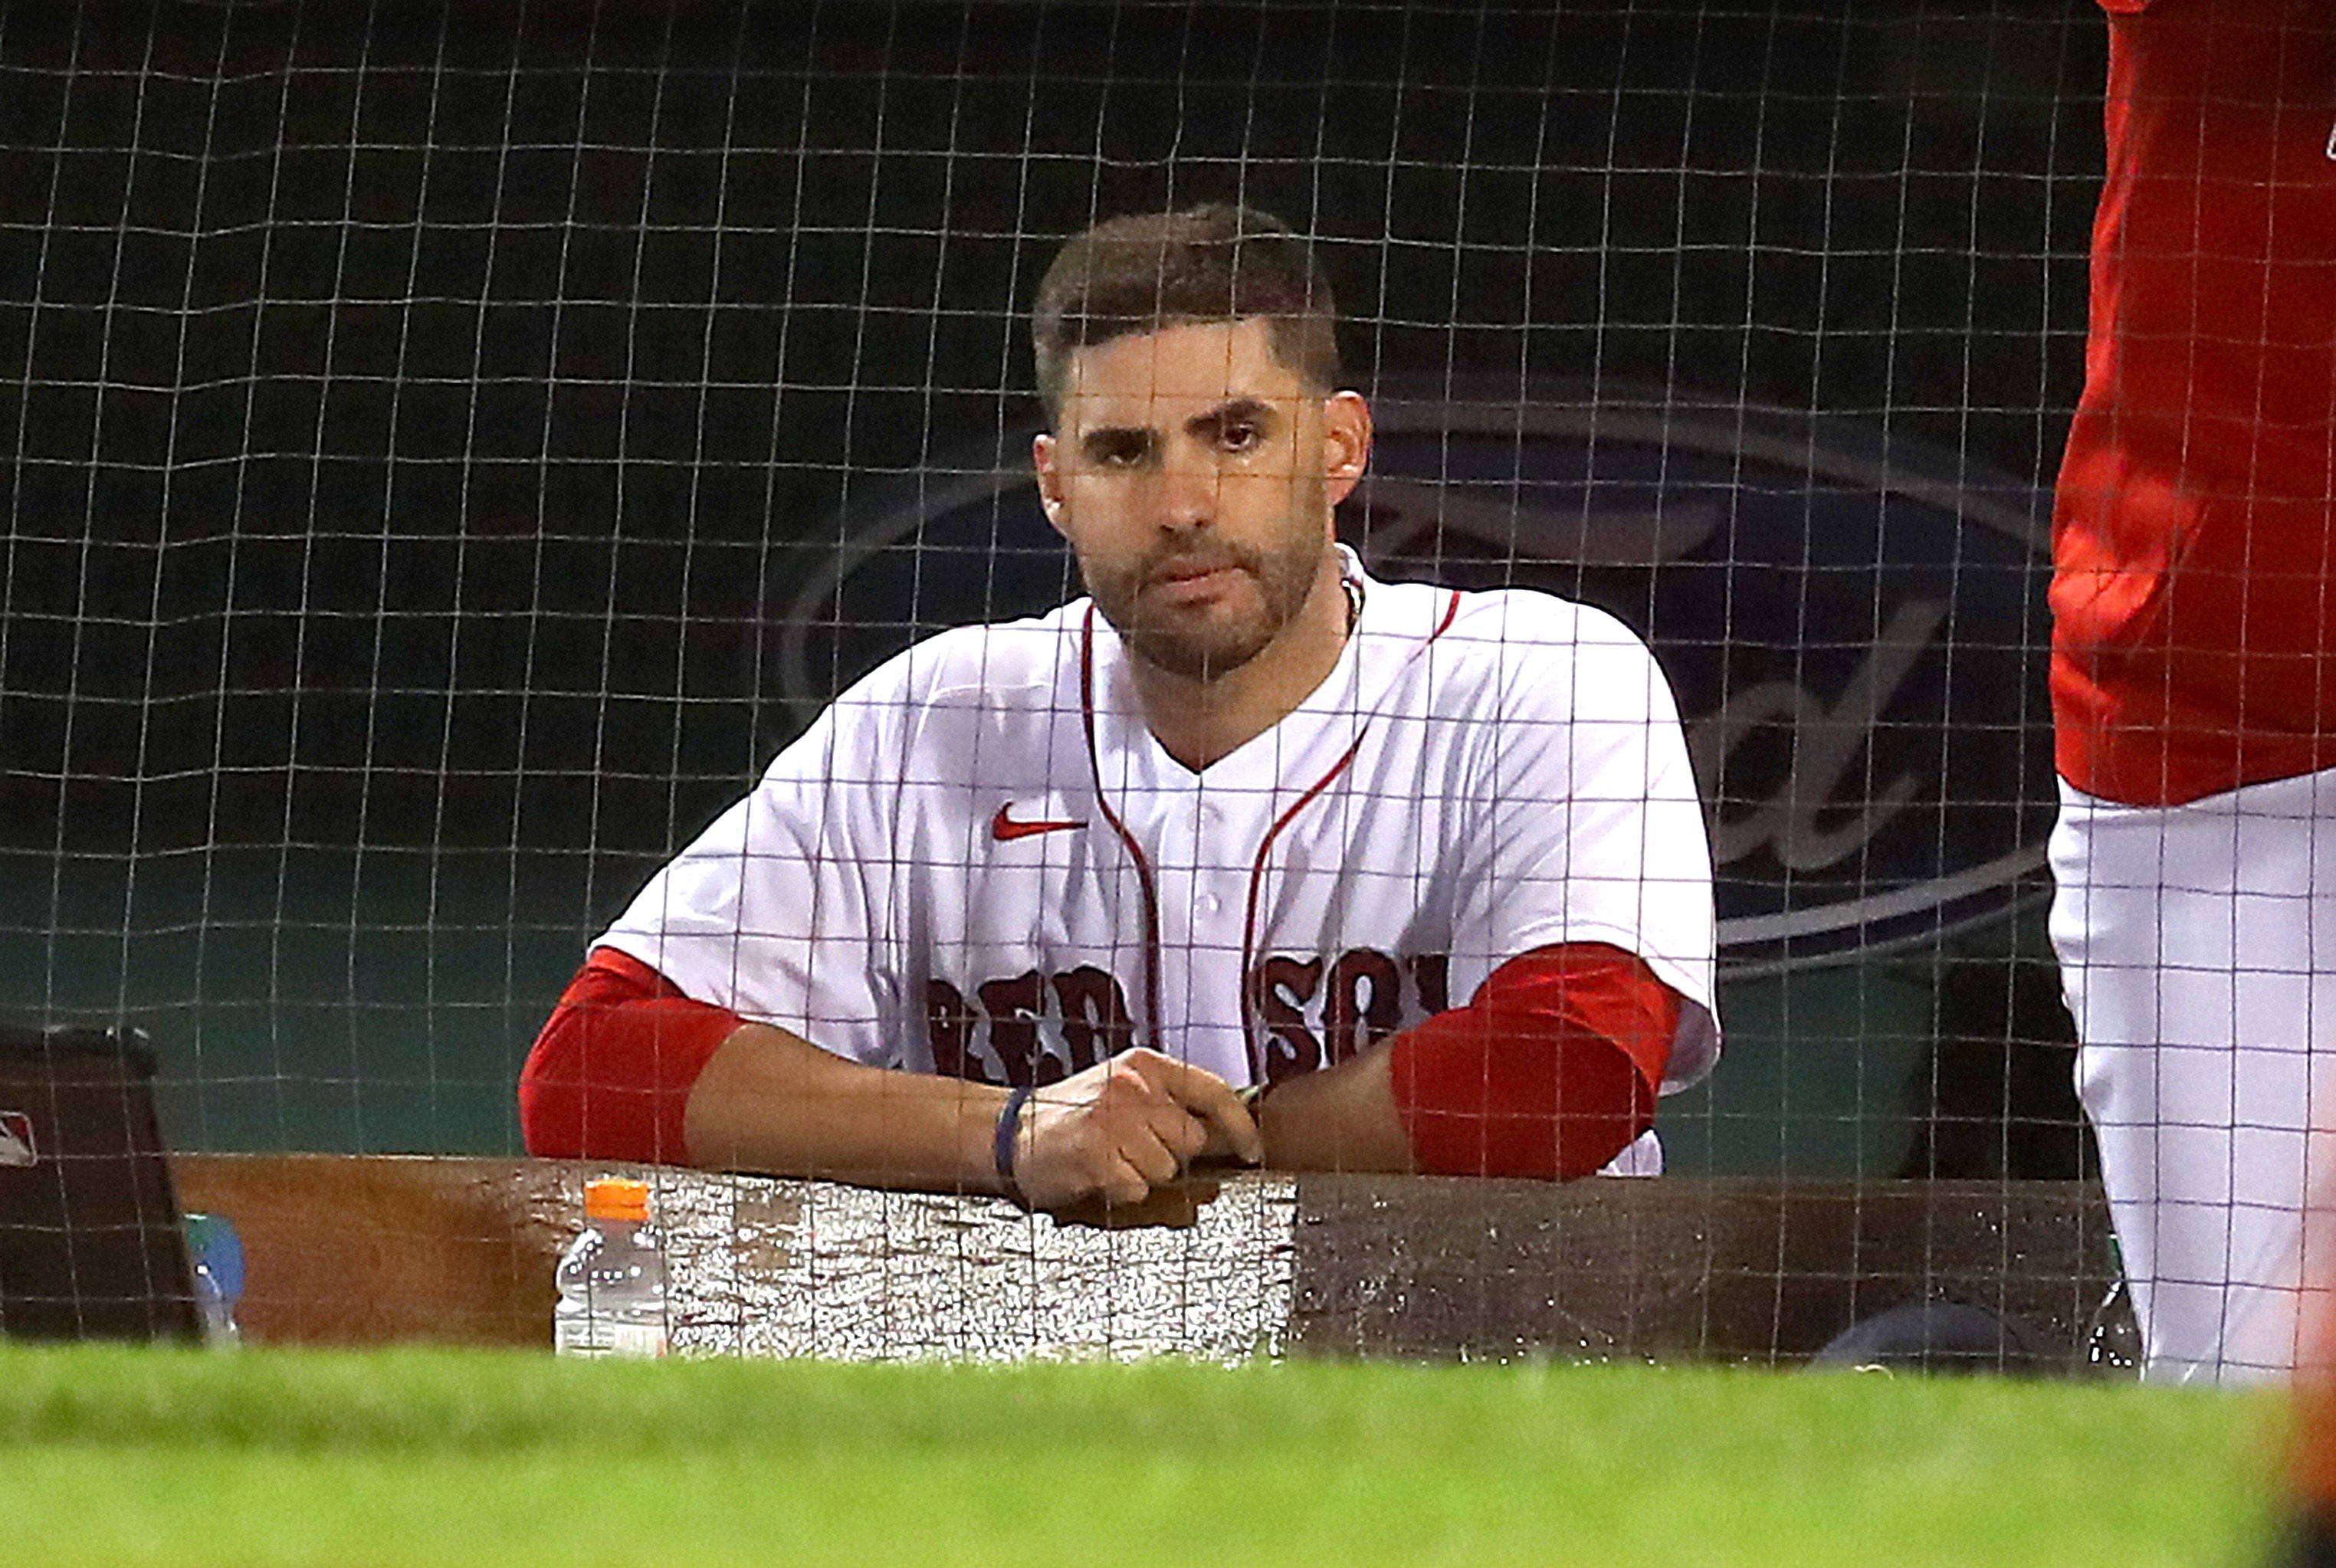 J.D. Martinez Claims 2020 Struggles Don't Make All-Star Honor Sweeter